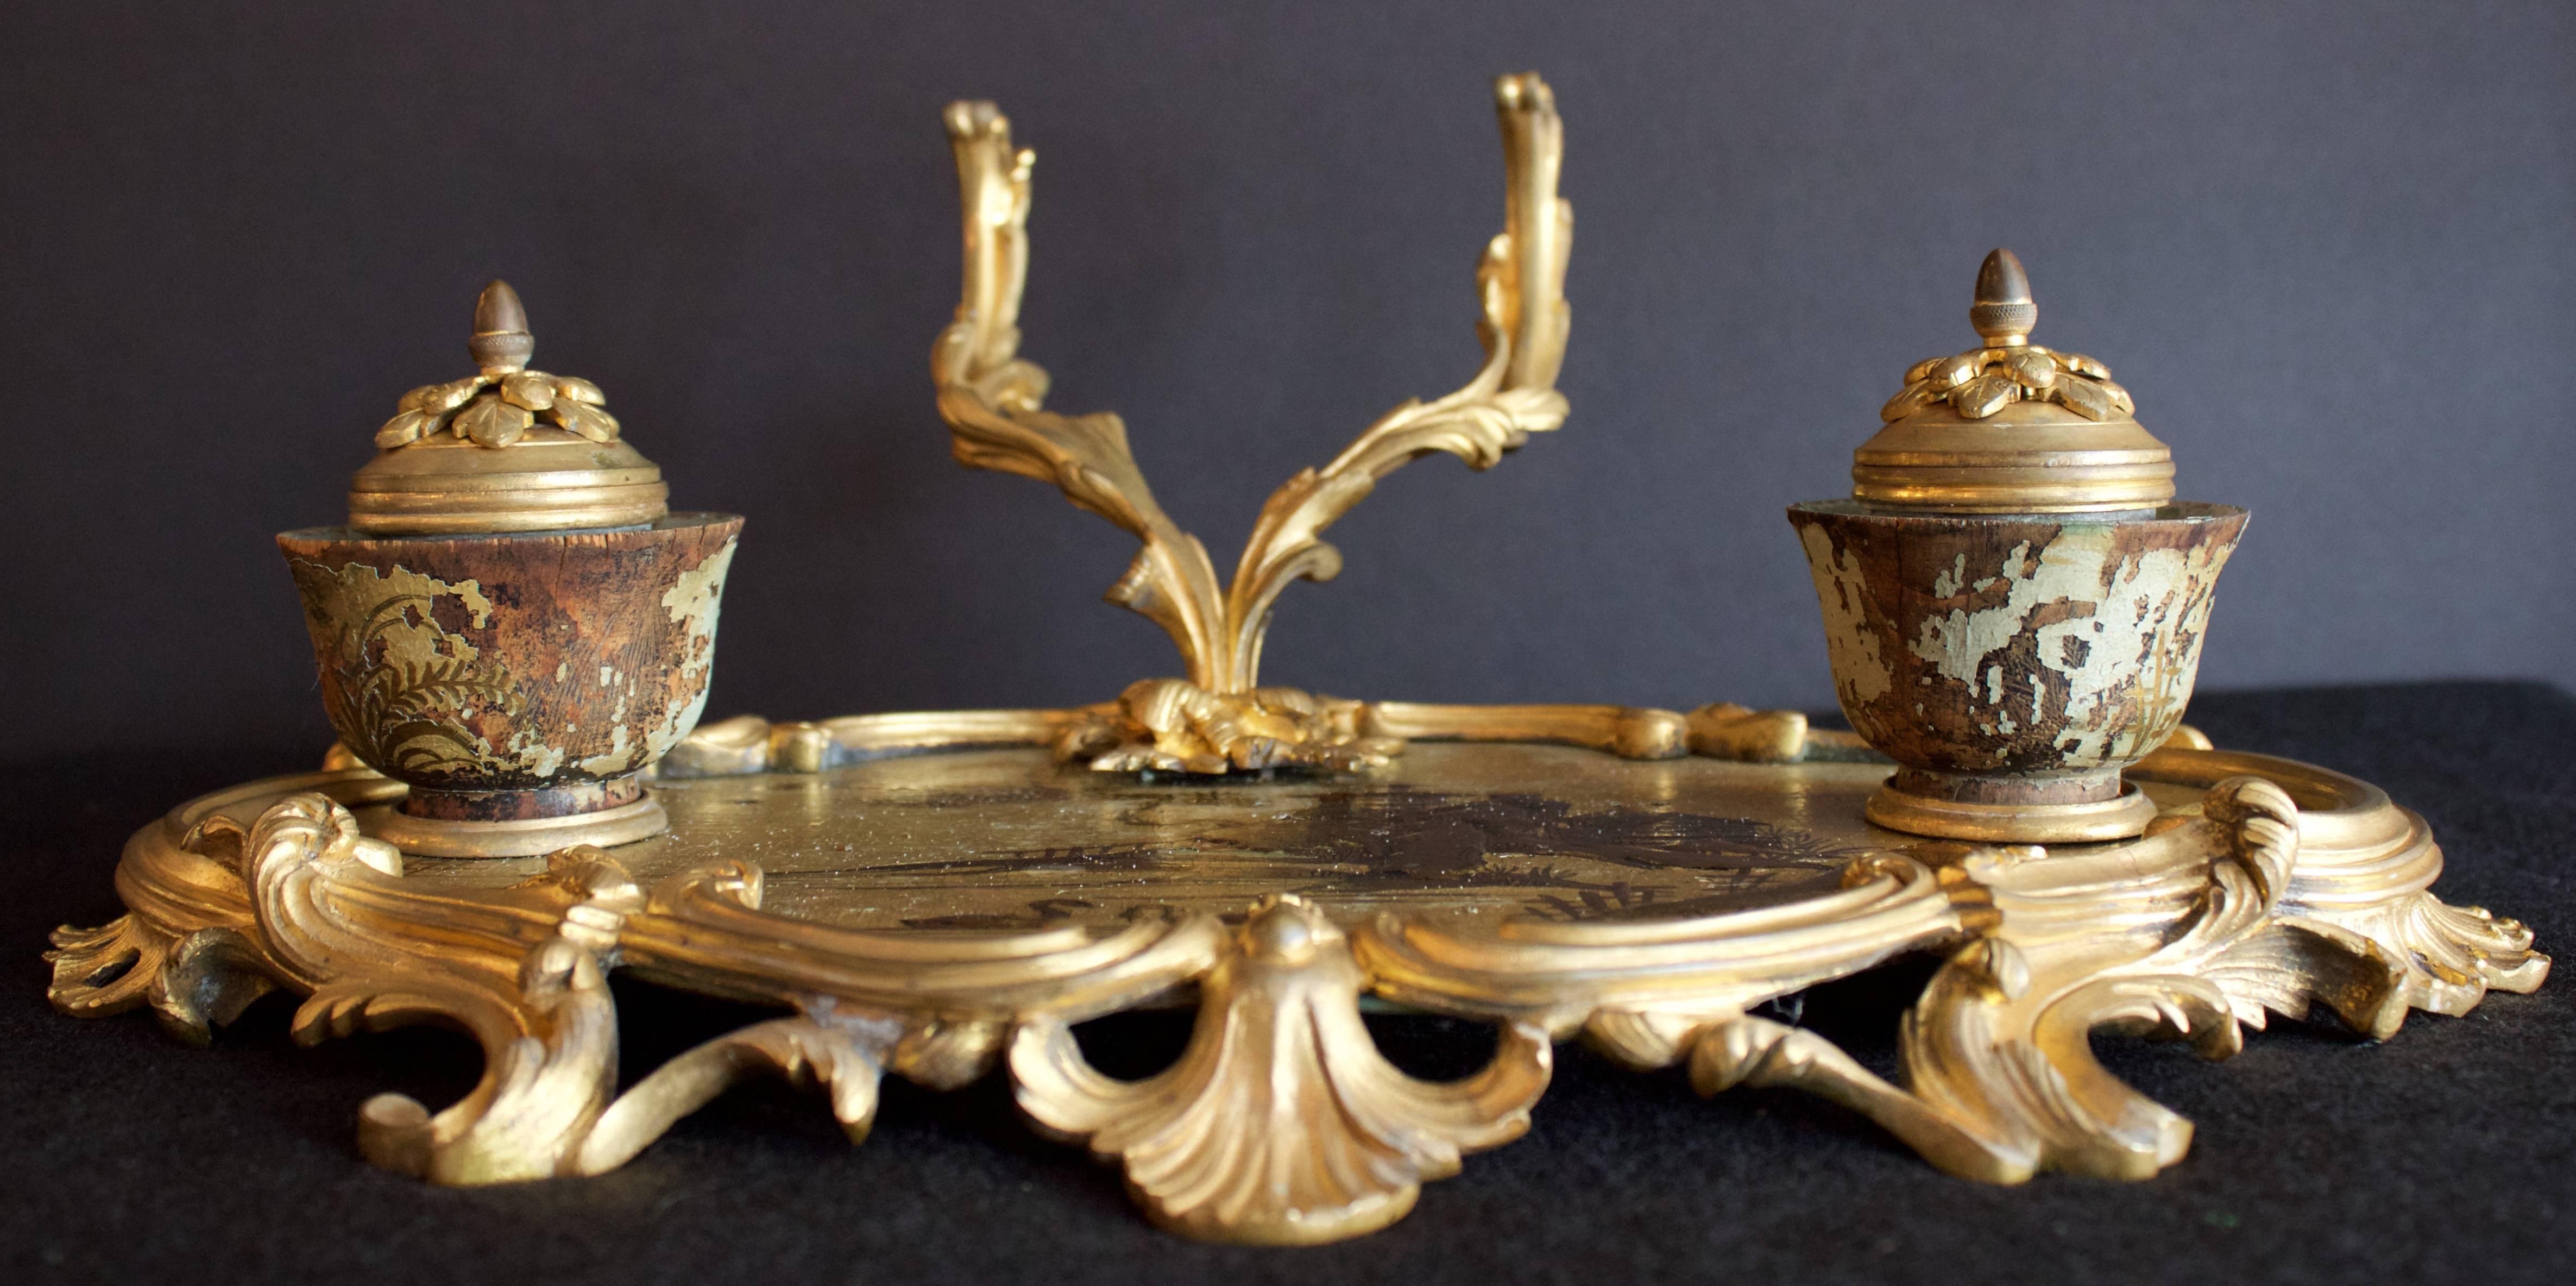 Rare and superb Louis XV period inkstand finely chased and gilded bronze base in a Rocaille decor of stylized leaves and shells. At top, resting on a Chinoiderie lacquered wooden tray the Rocaille gilt bronze pen holder and two inkwell in gilt